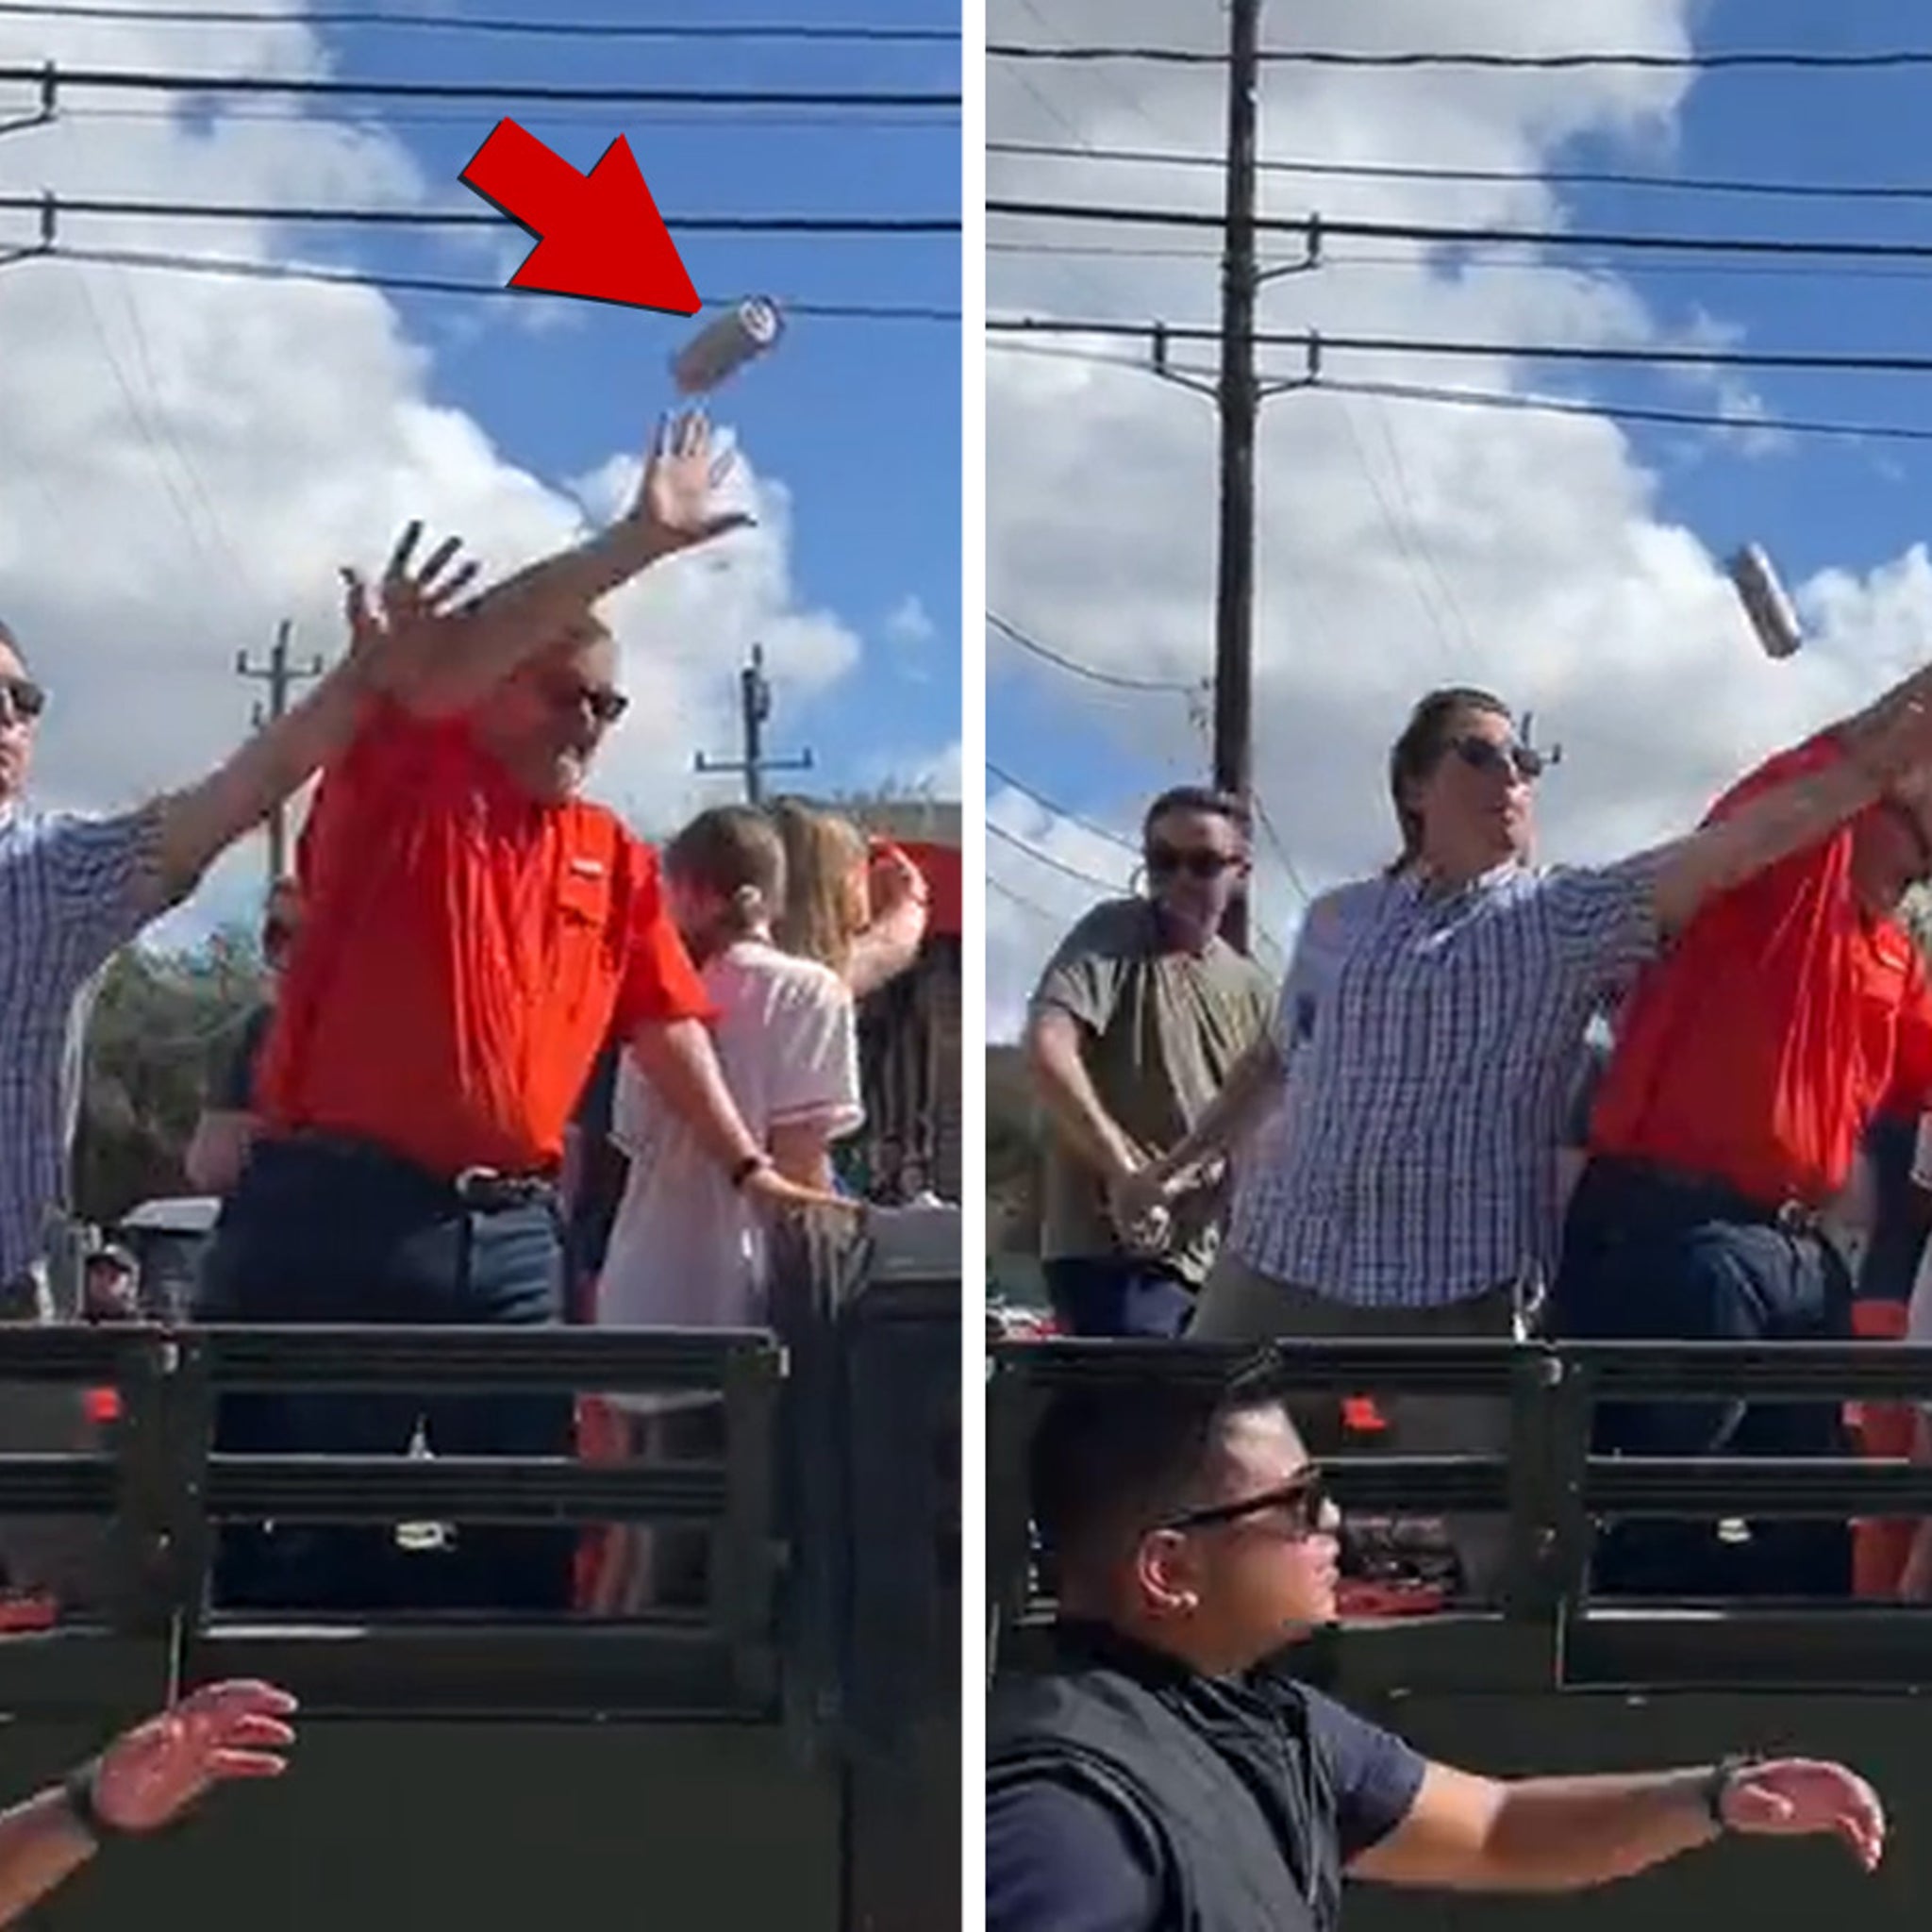 Astros fans do not like that man Ted Cruz, struck by beer at World